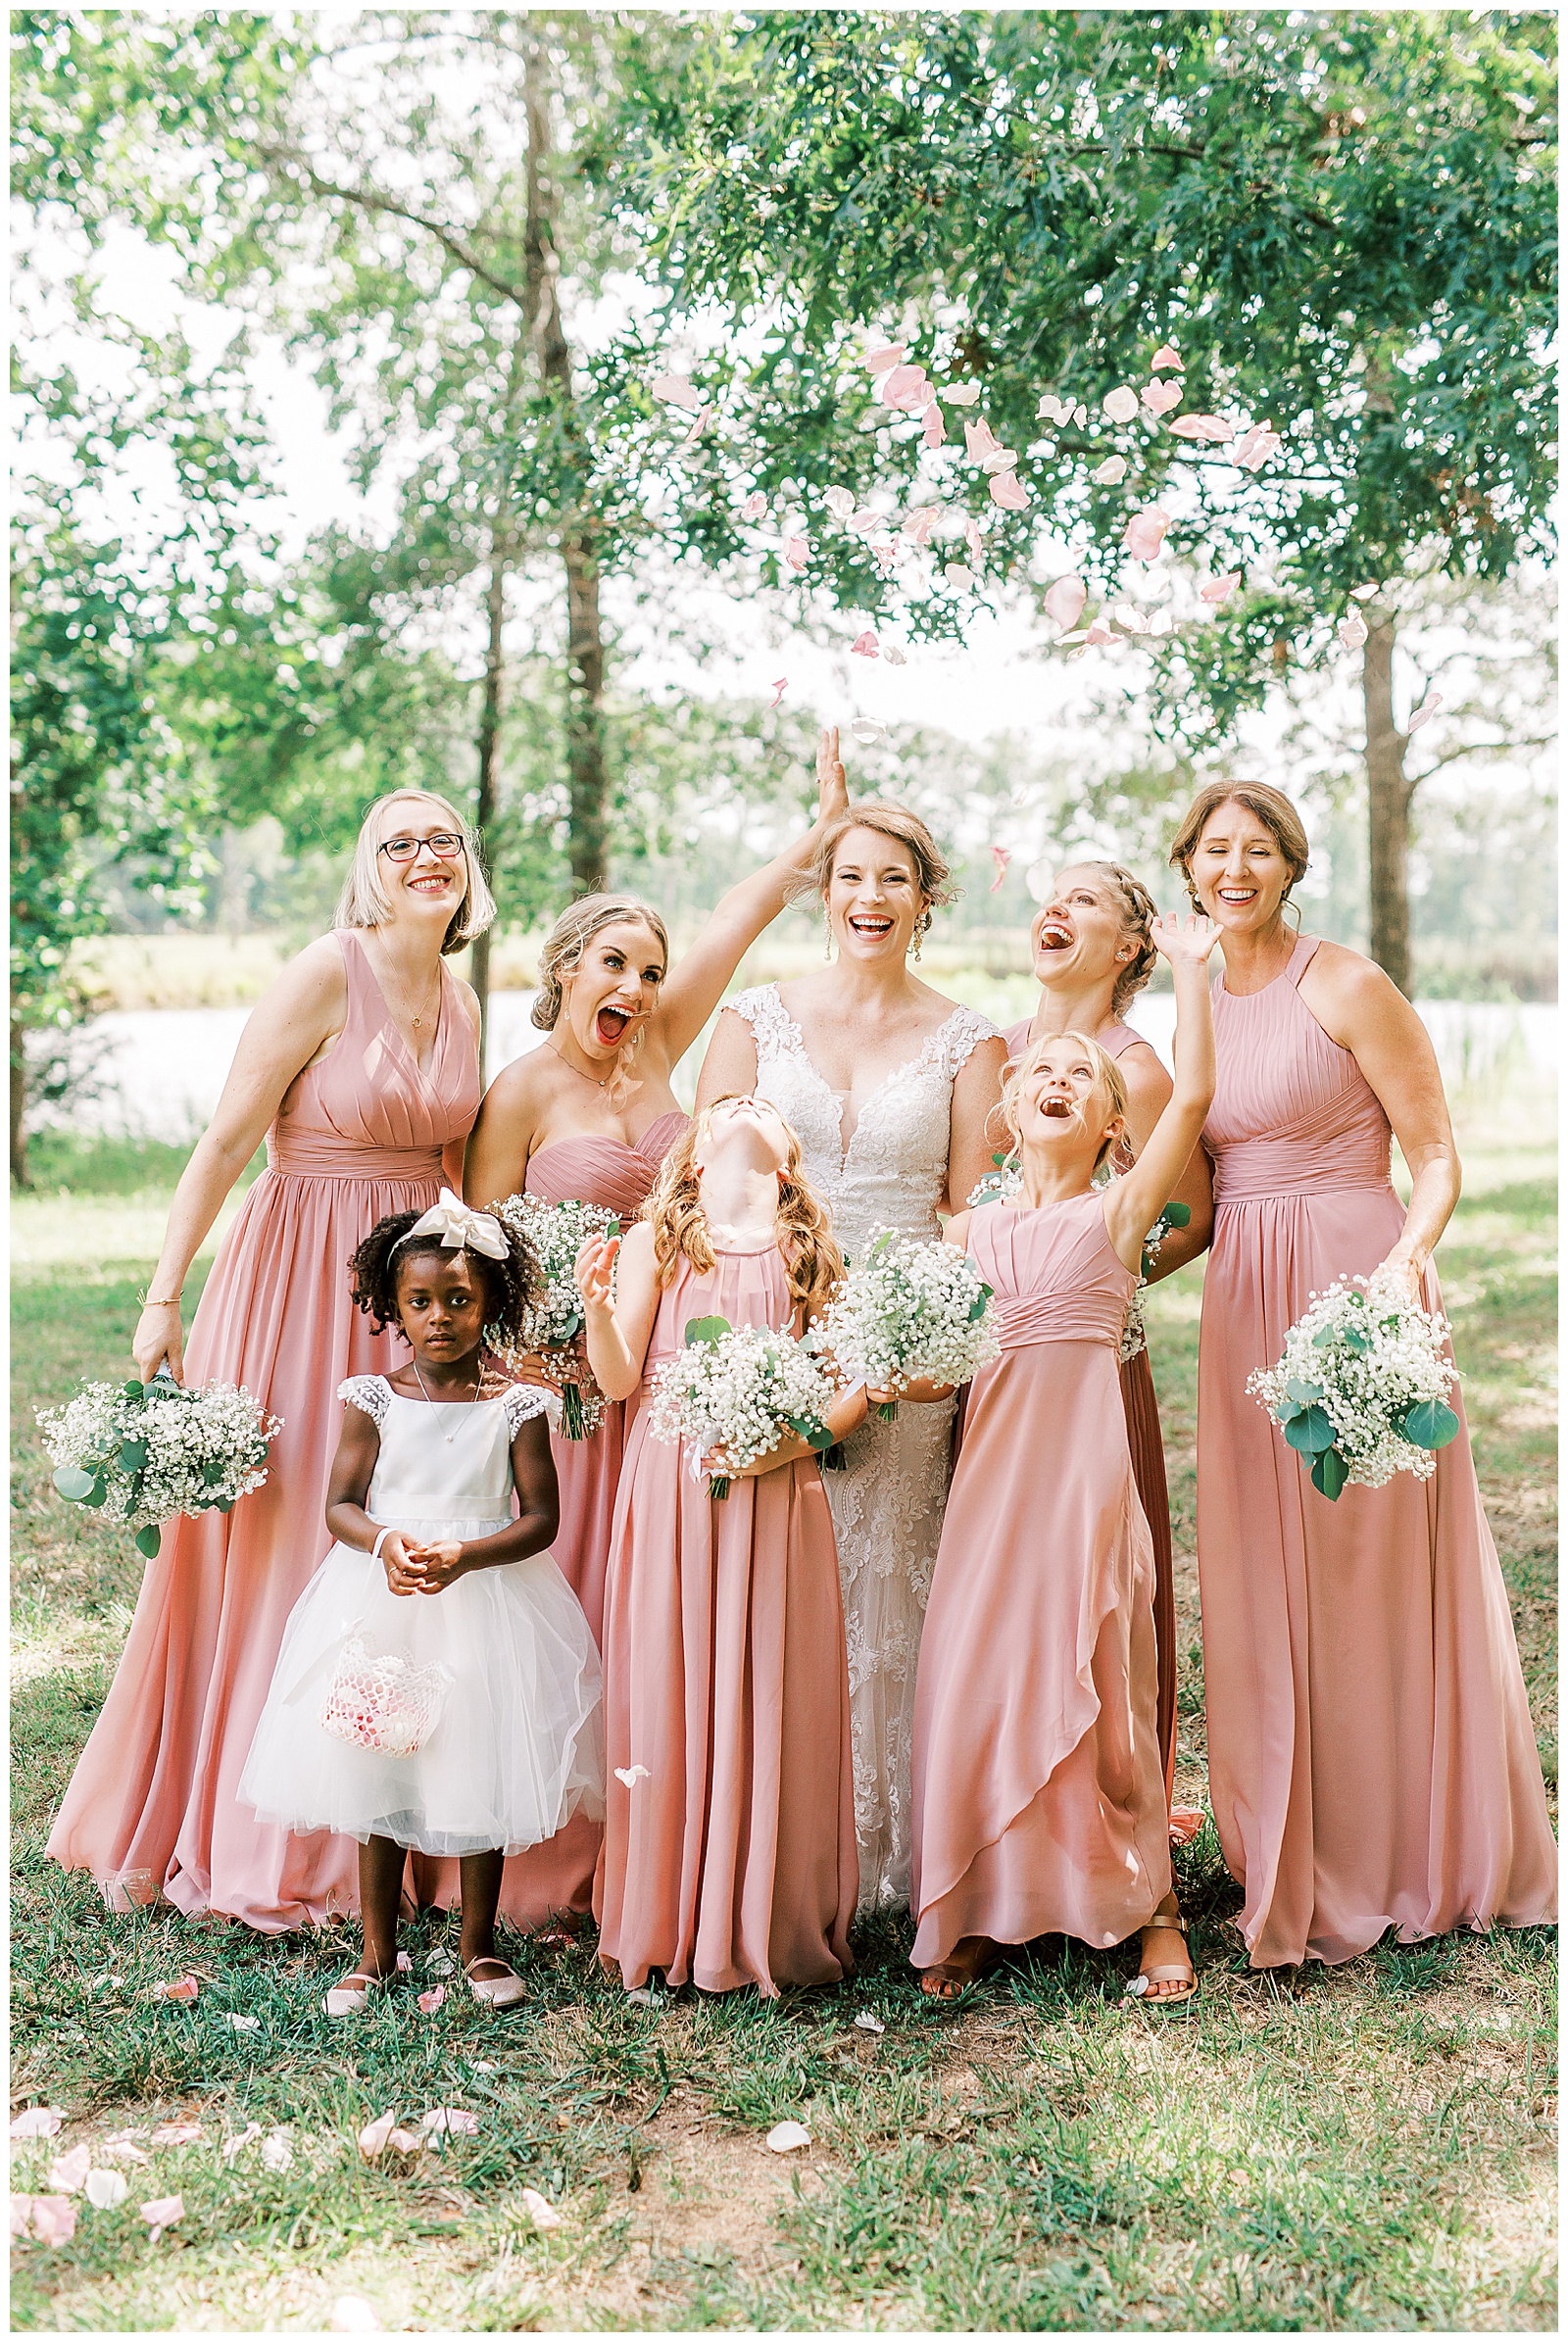 tossing petals in the air for sweet pink bride tribe portraits for outdoor summer wedding